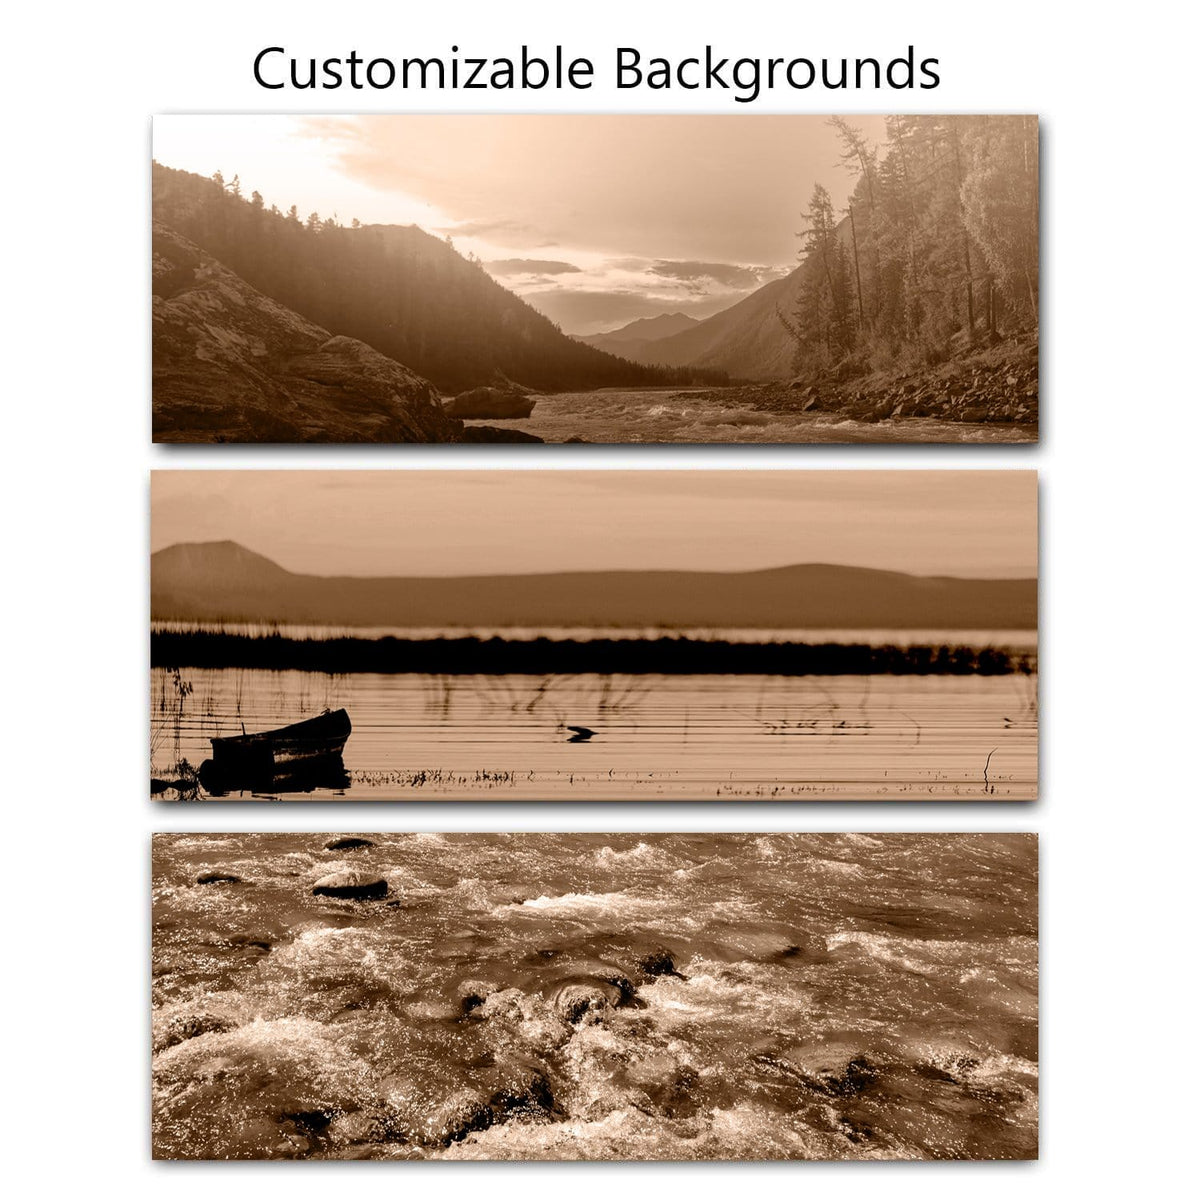 Custom background options to create the perfect personalized gift for the fisherman